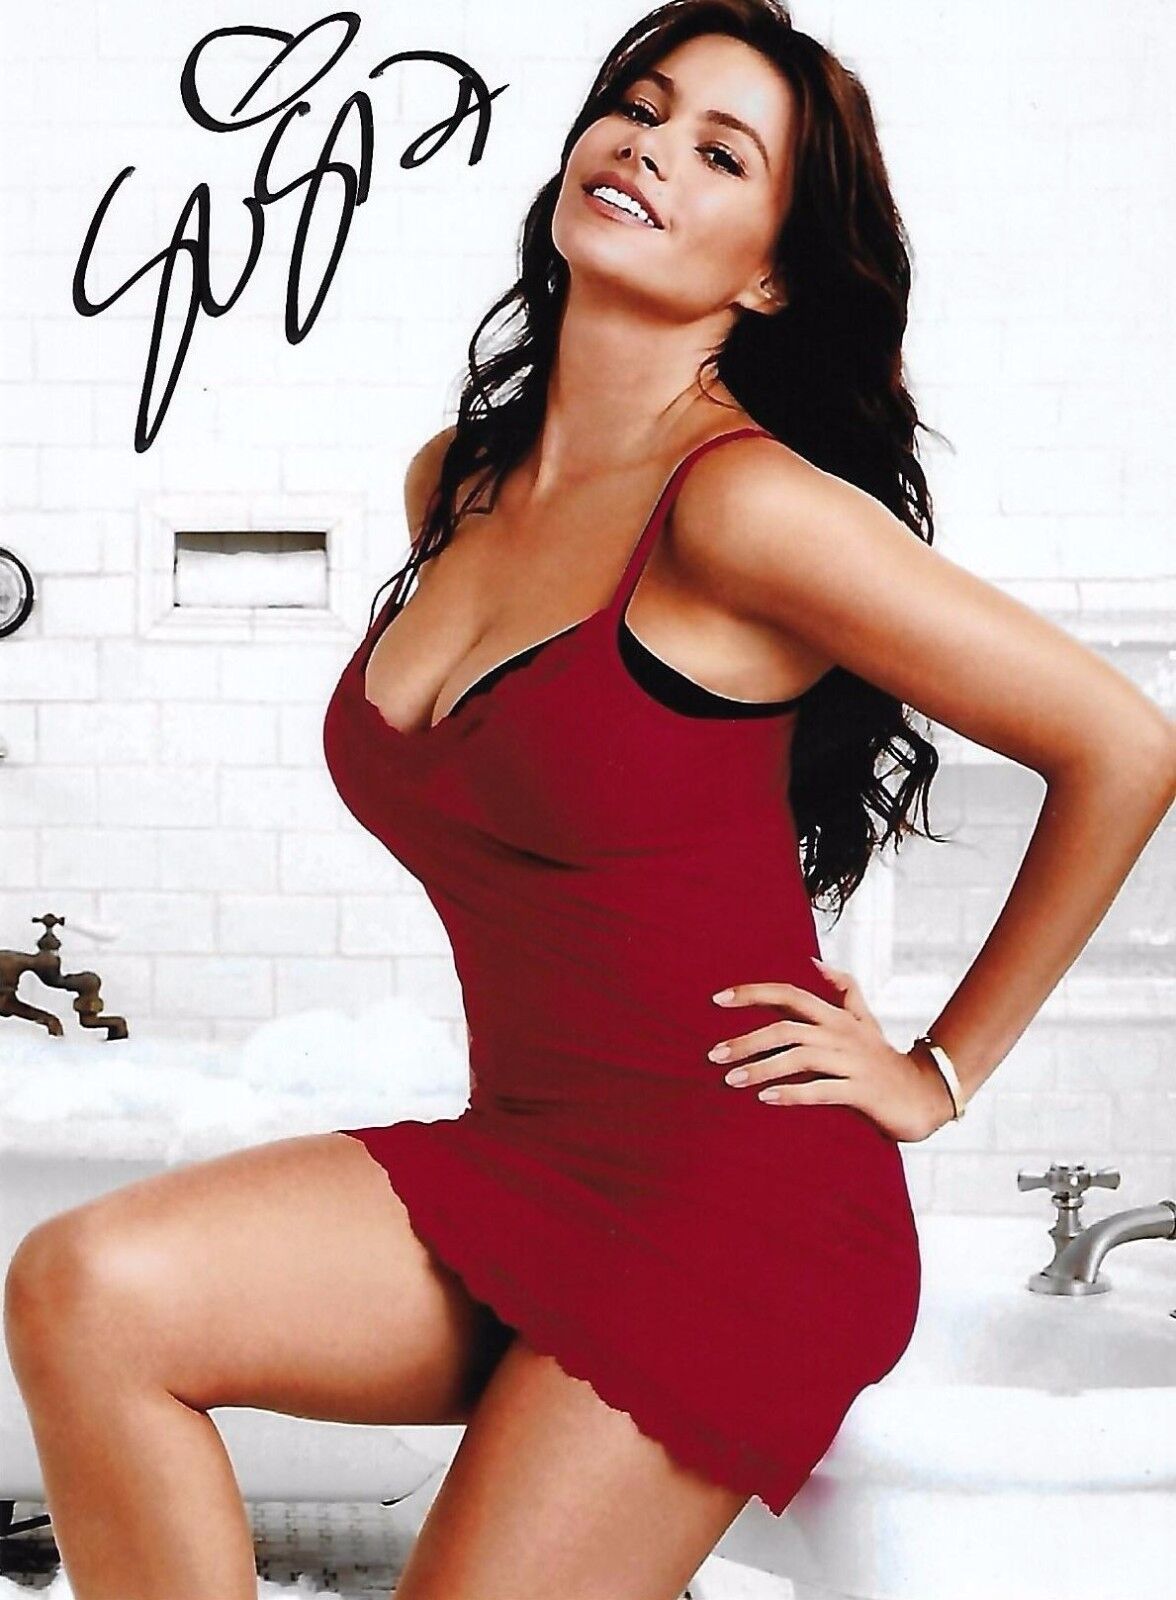 Sofía Vergara signed Autographed Photo Poster painting RARE HOT SEXY